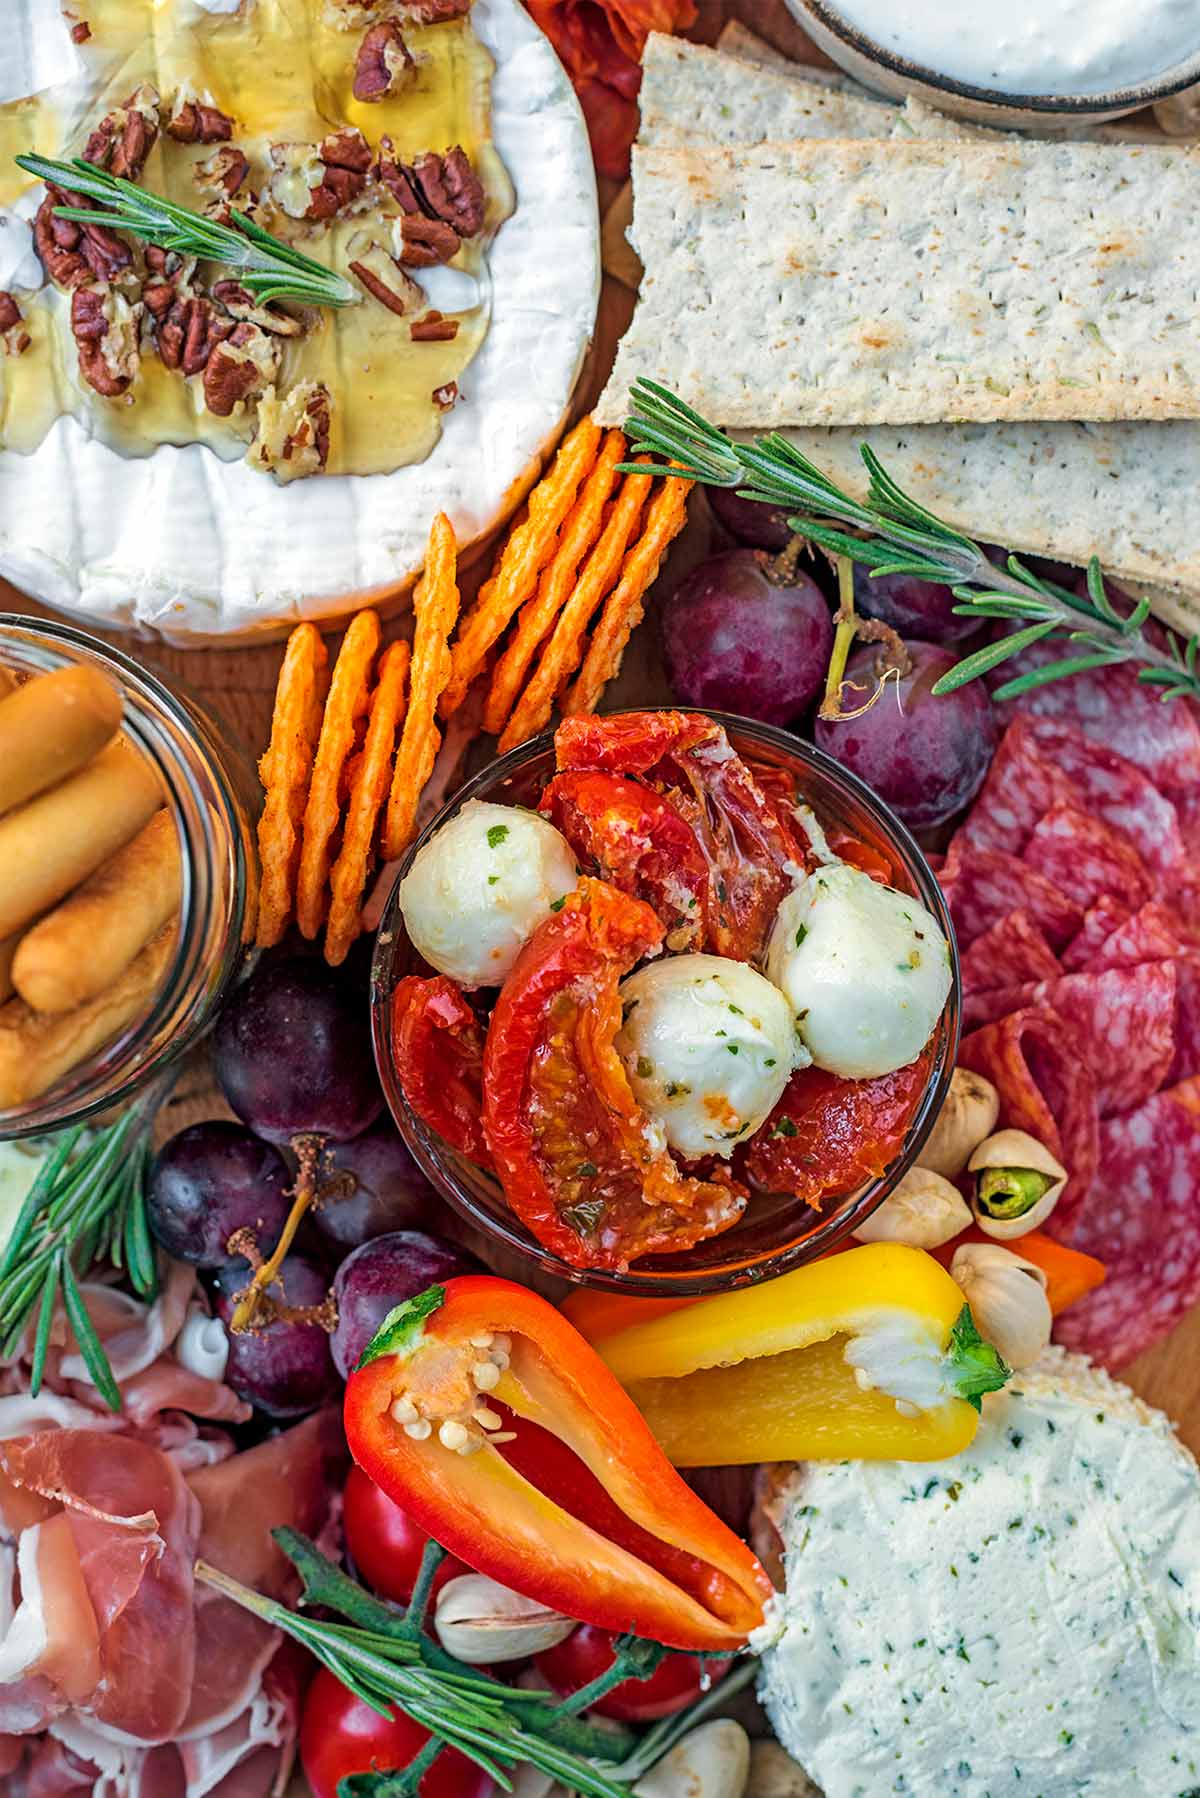 Sun-dried tomatoes, cheese, cured meats, grapes and crackers al together on a board.